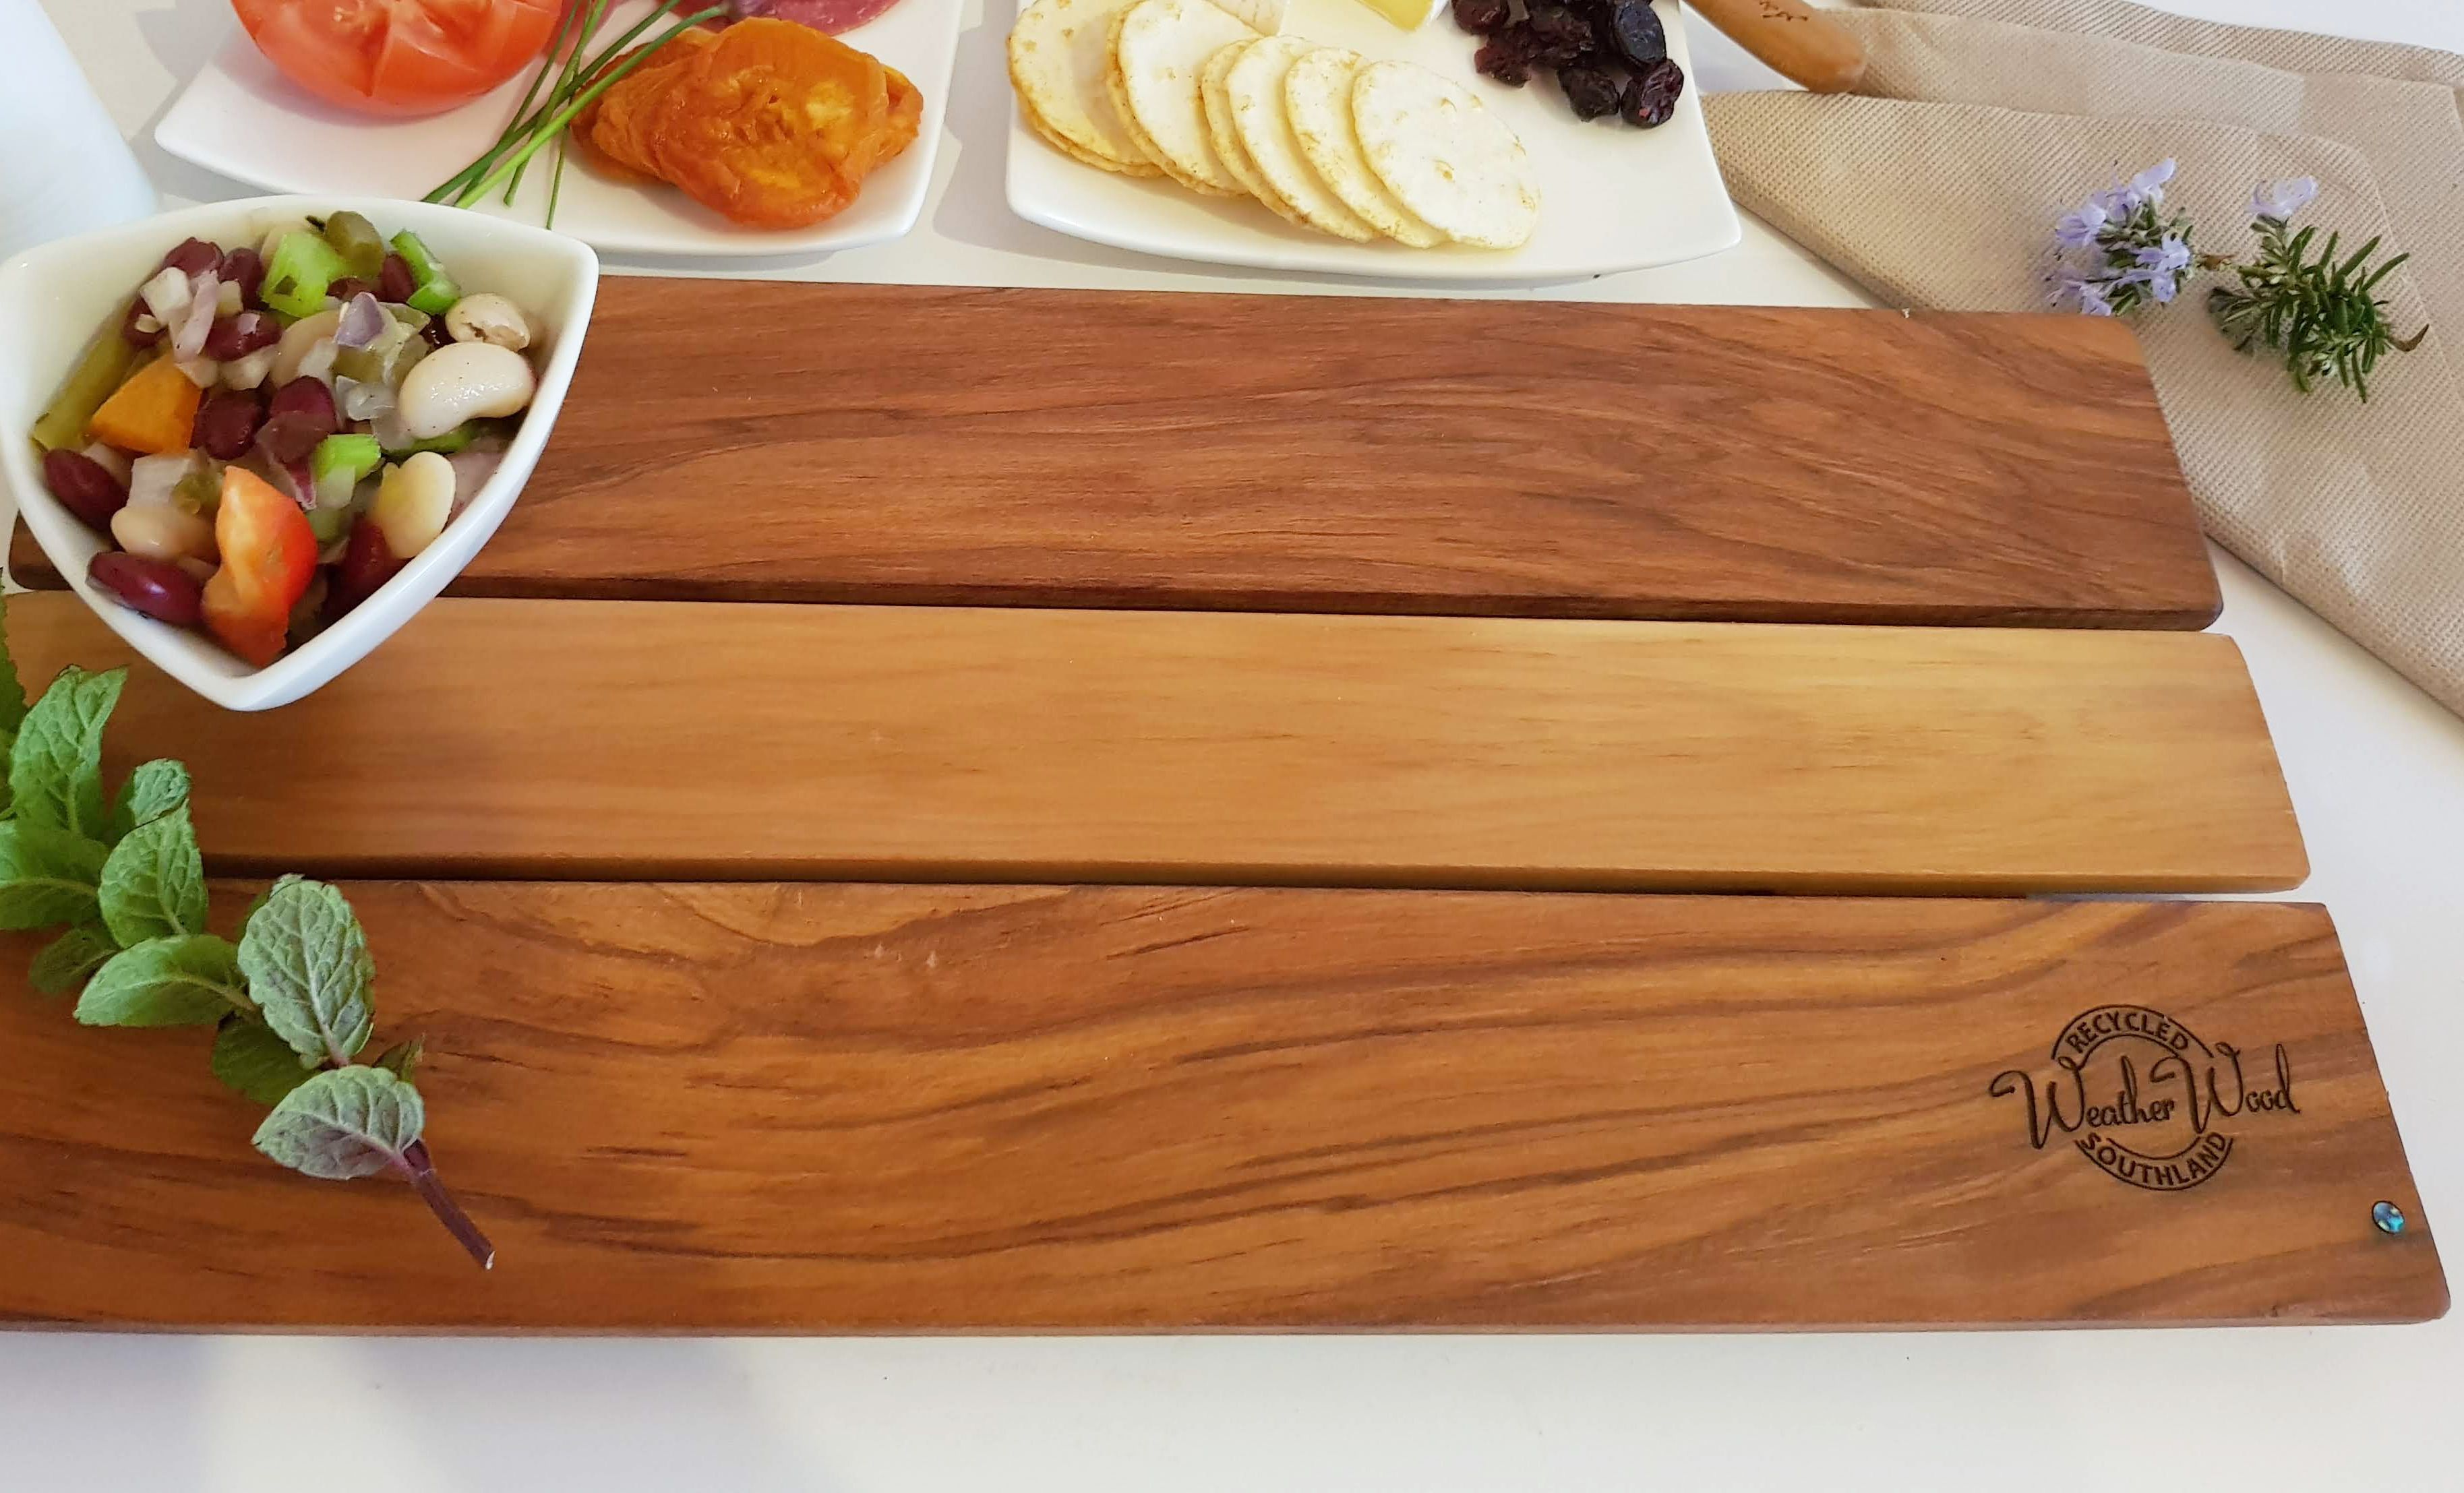 NZ made Cheeseboards branded for Corporate Christmas Gifts